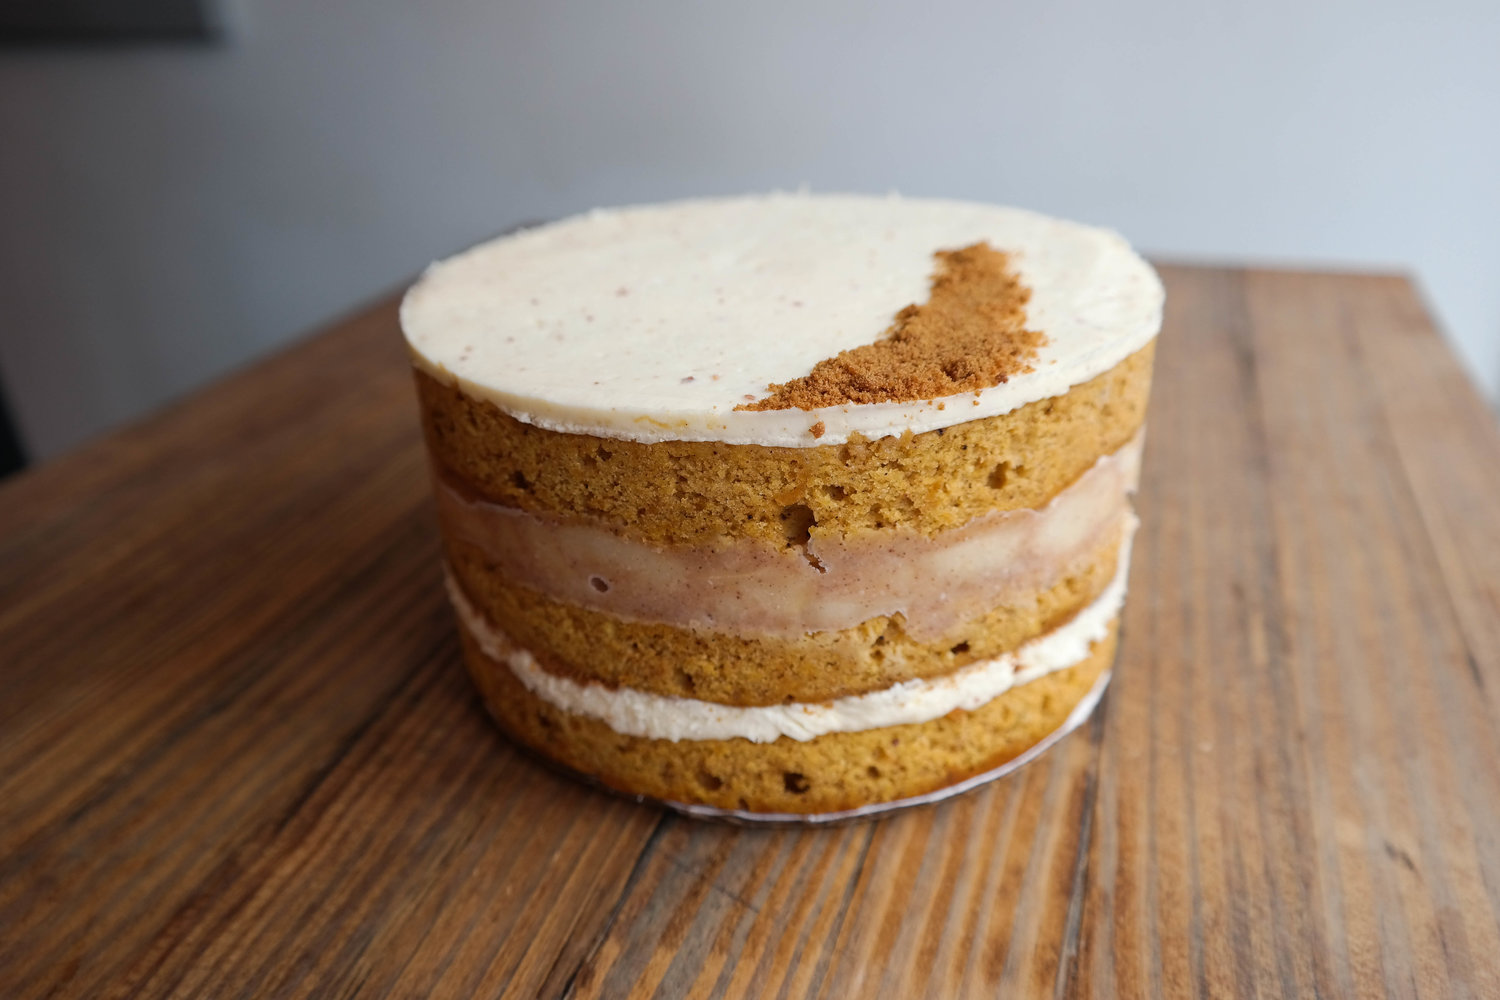   Pumpkin Brown Butter Cake - pumpkin cake layered with brown butter cream cheese frosting and spiced pear compote (seasonal: available October-January) 